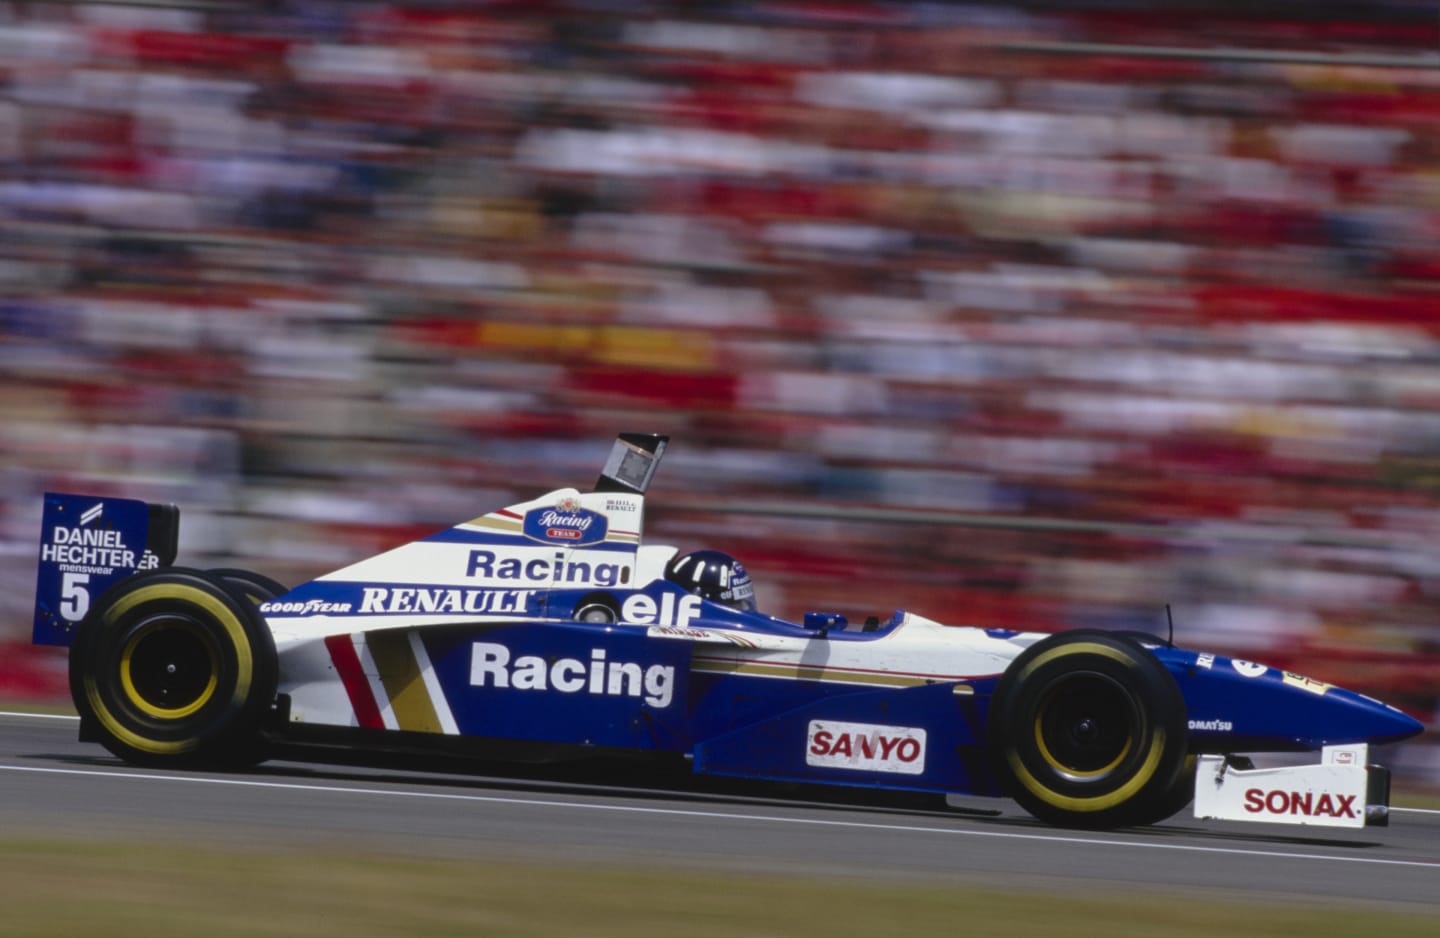 Damon Hill of Great Britain drives the #5 Rothmans Williams Renault Williams FW18 Renault V10